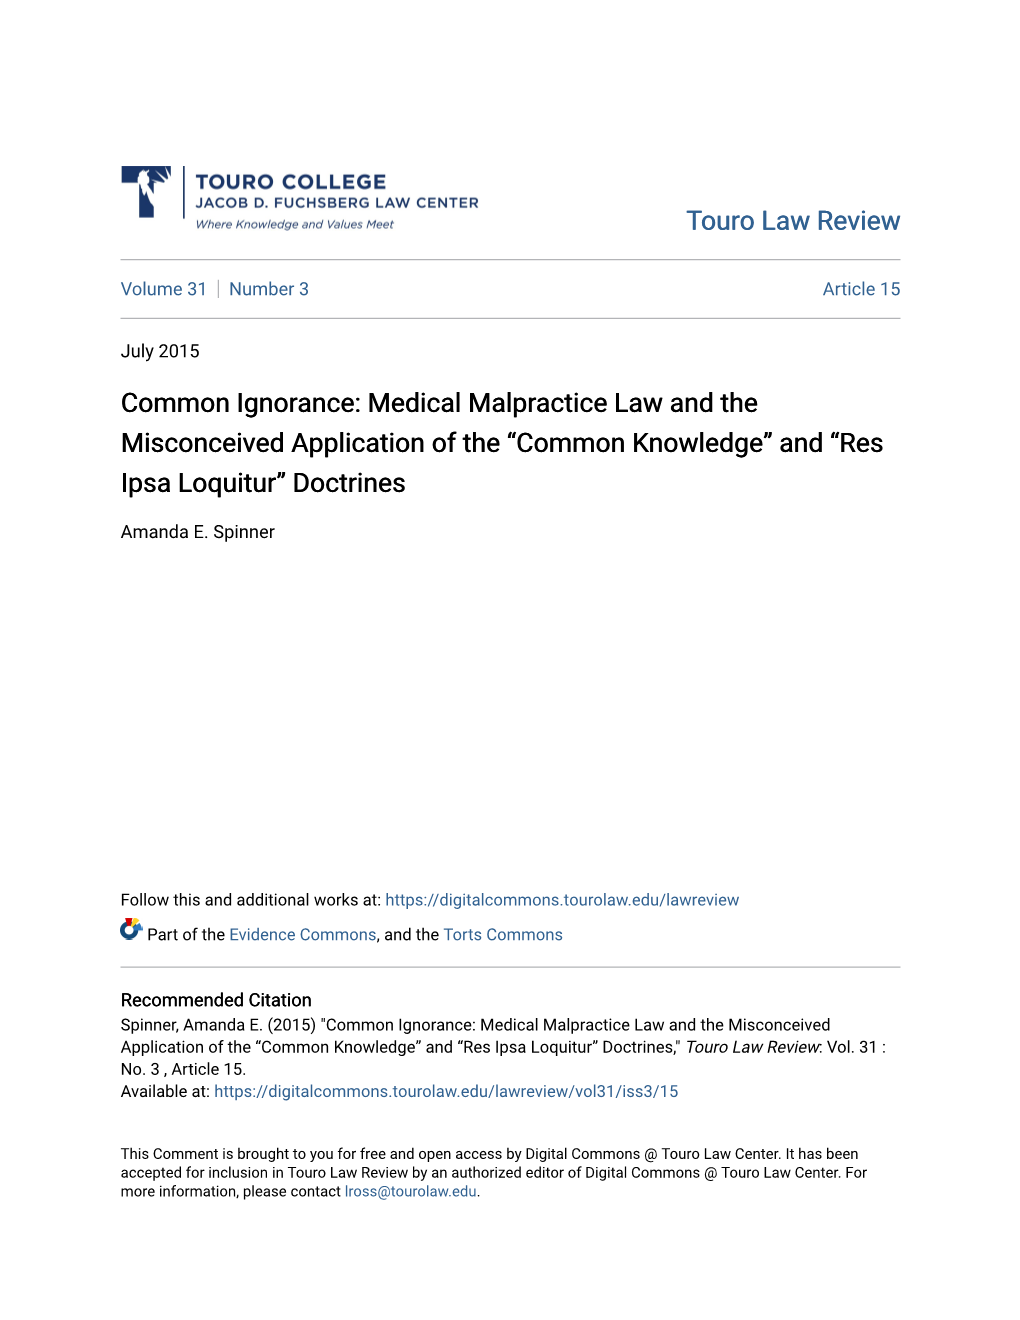 Medical Malpractice Law and the Misconceived Application of the “Common Knowledge” and “Res Ipsa Loquitur” Doctrines